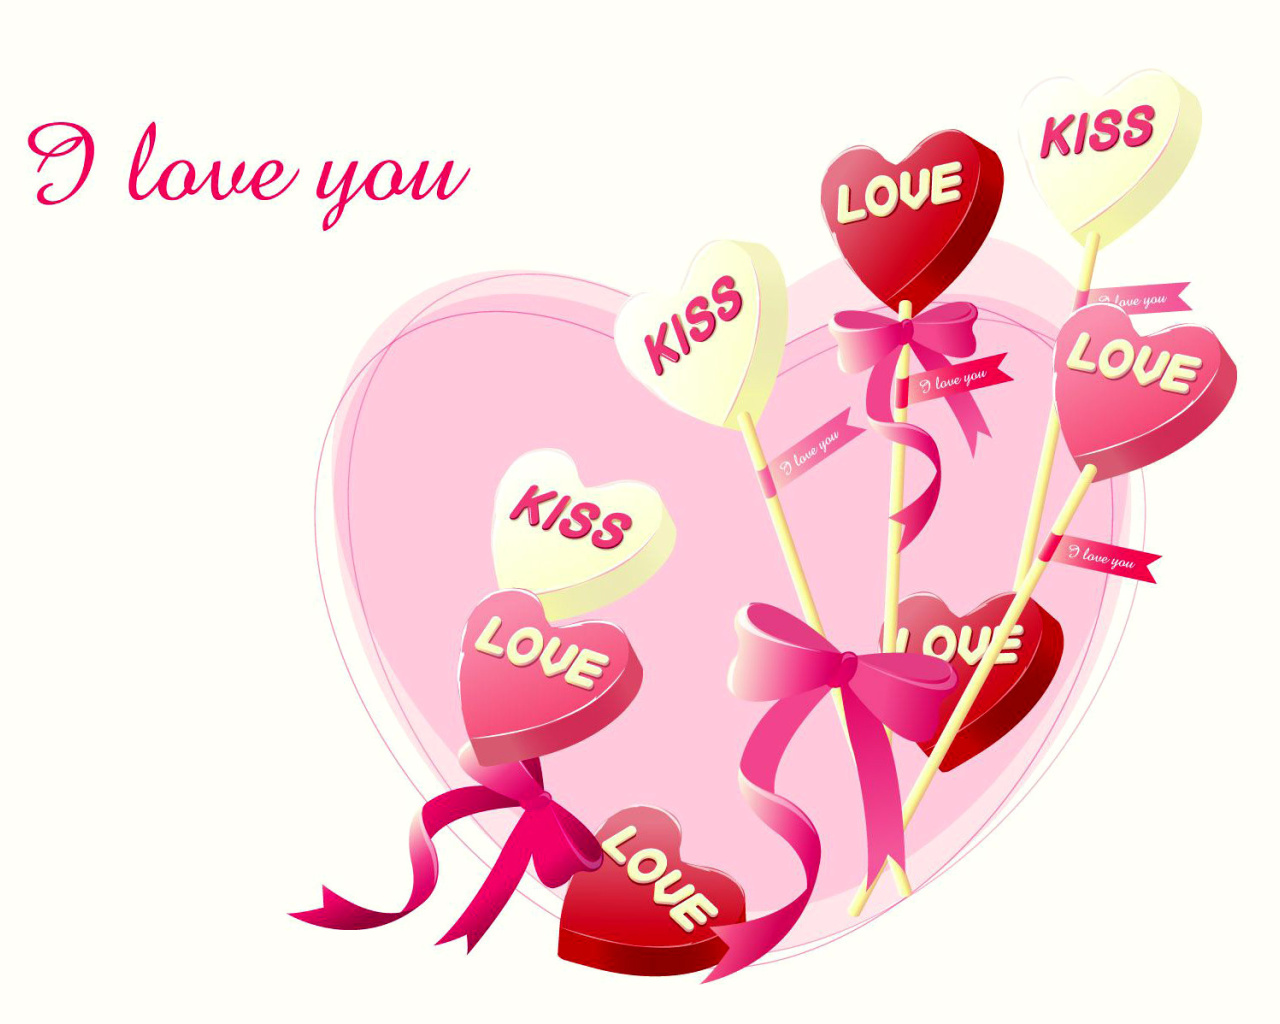 I Love You Balloons and Hearts wallpaper 1280x1024